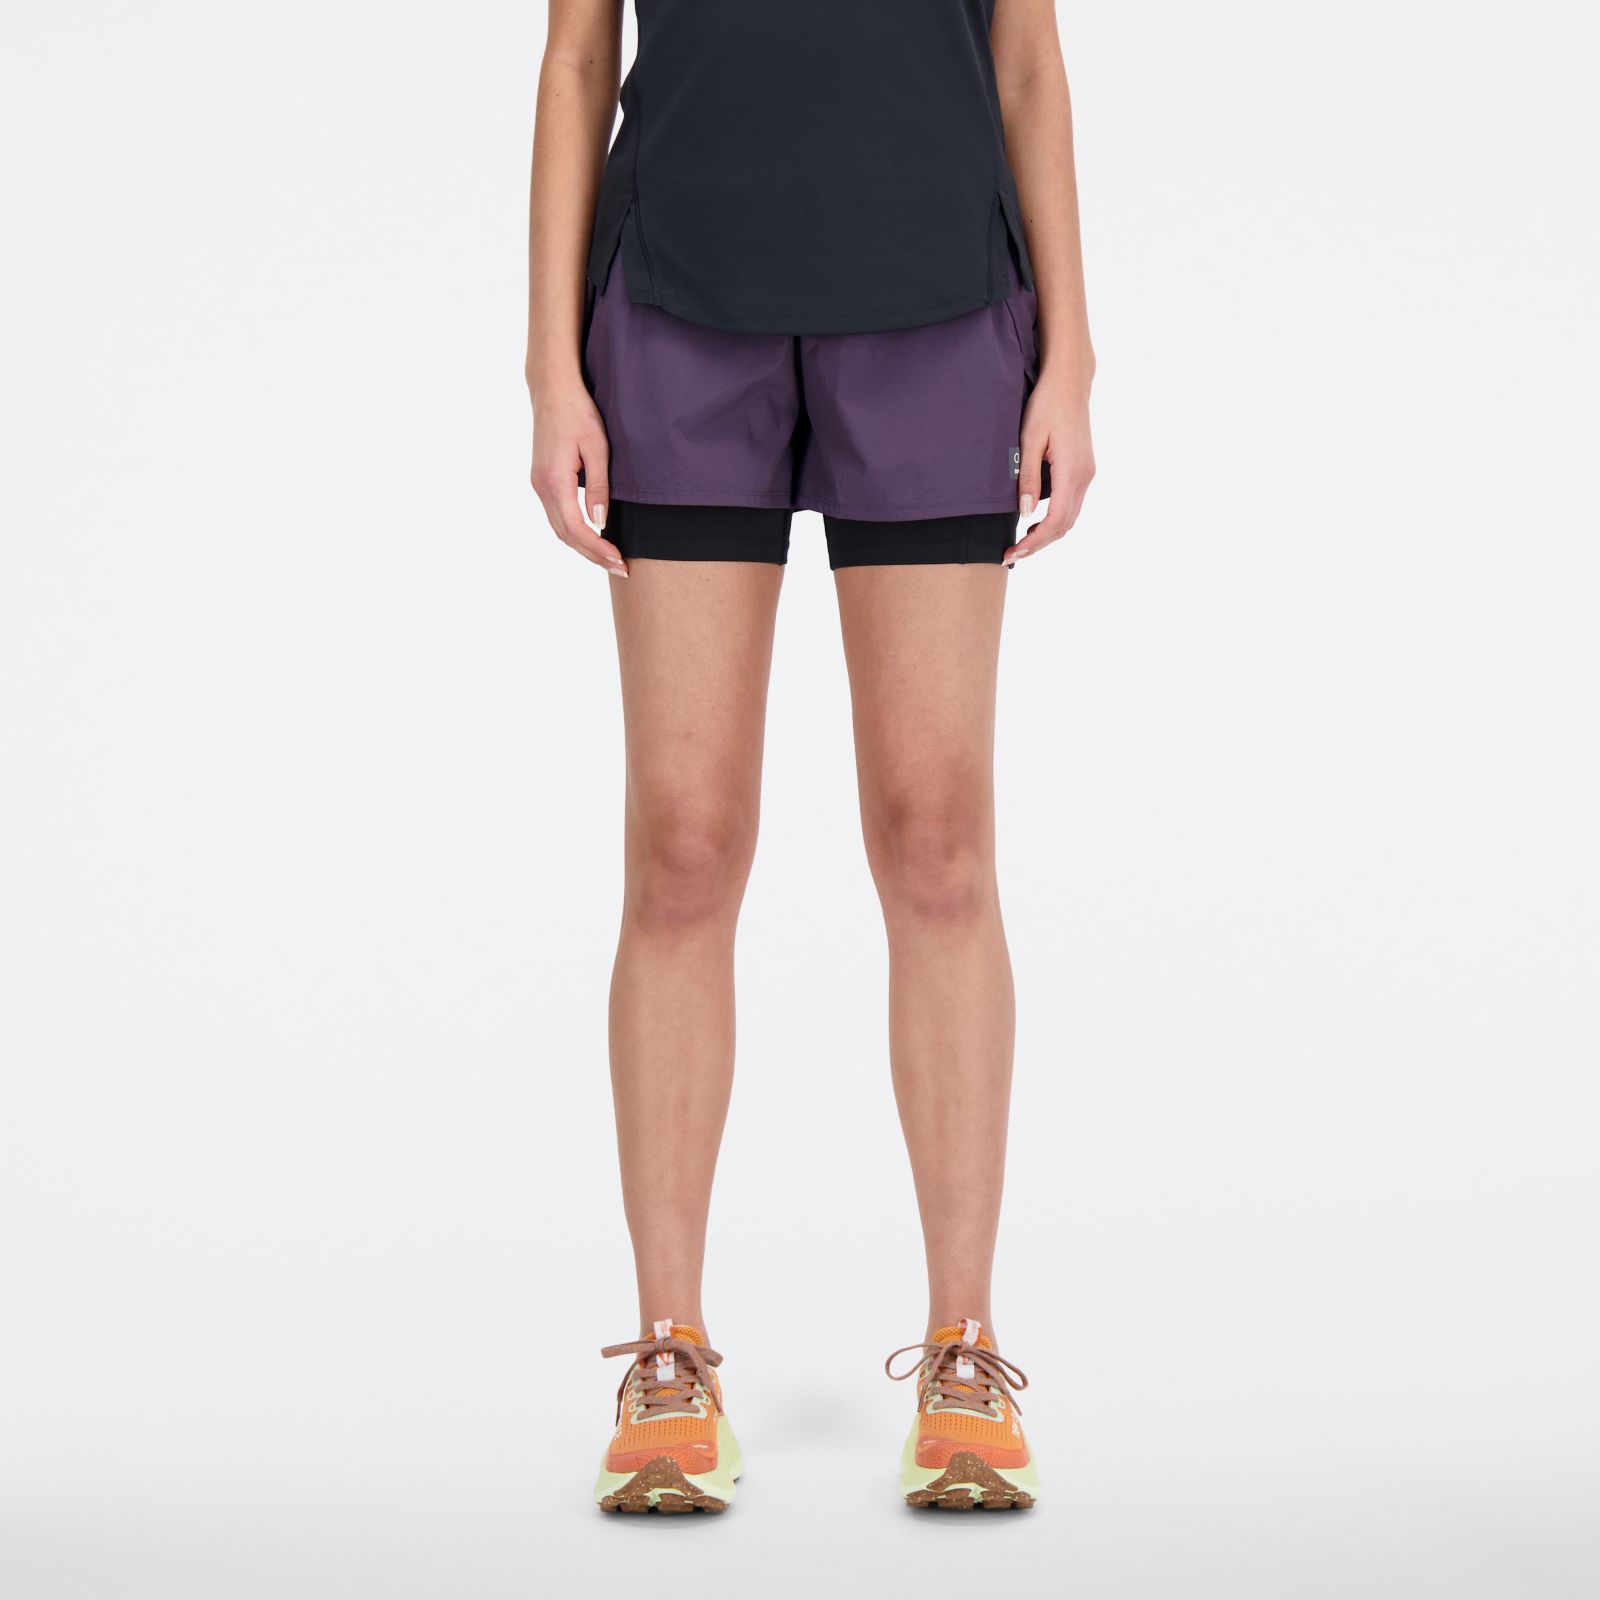 SHORT NEW BALANCE ACCELERATE 2.5 RUNNING MUJER FUCSIA WS01206FUS